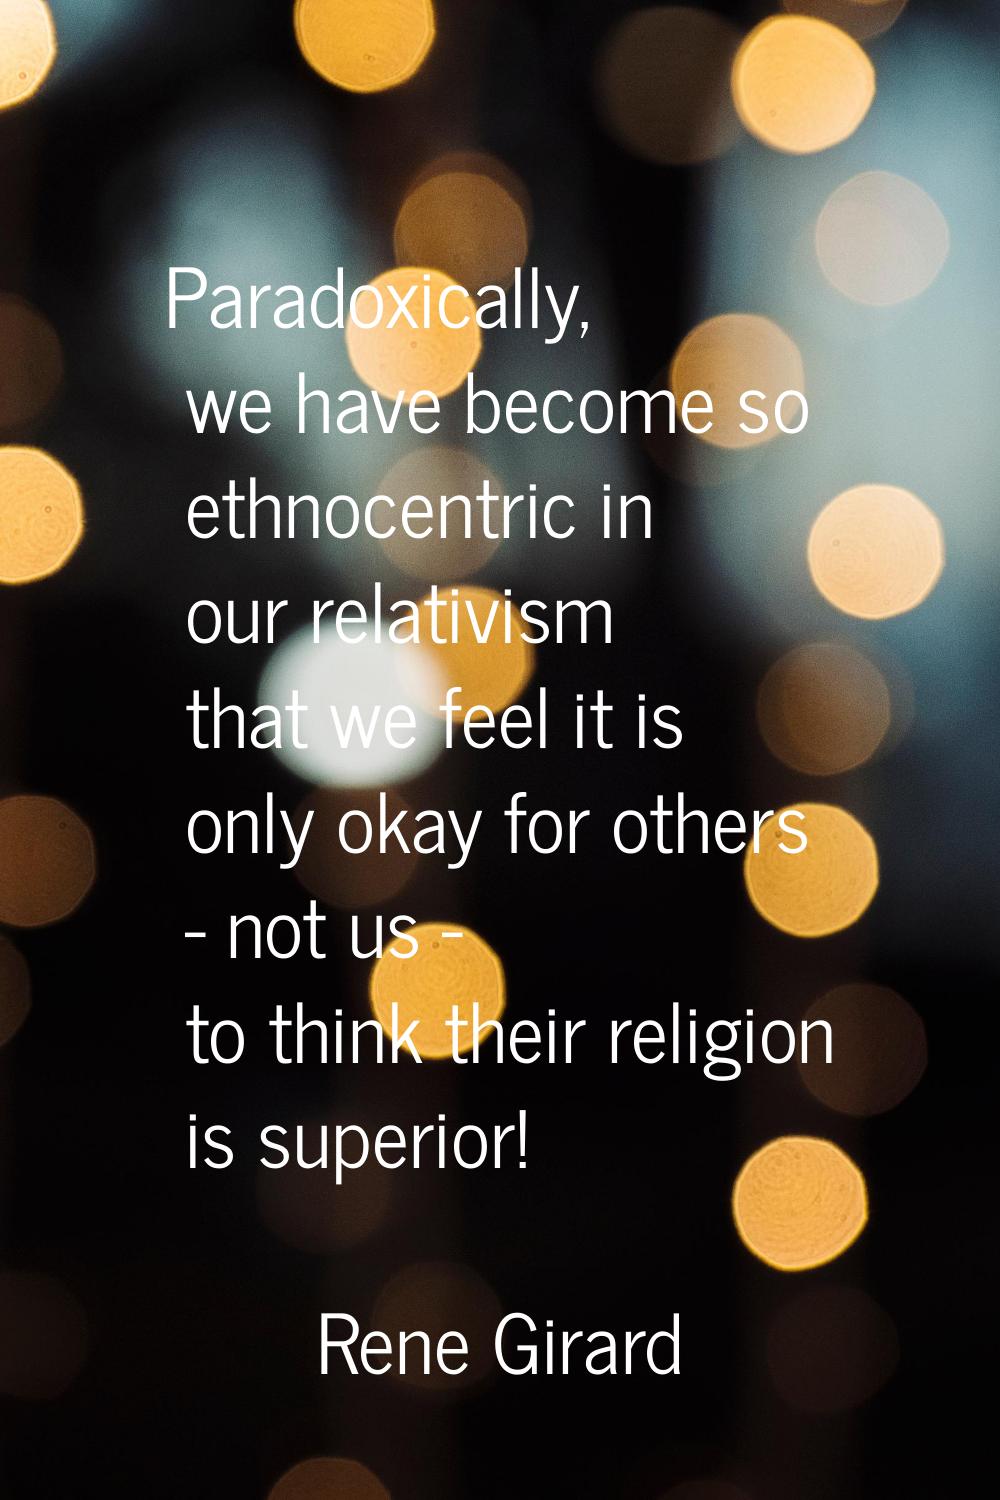 Paradoxically, we have become so ethnocentric in our relativism that we feel it is only okay for ot